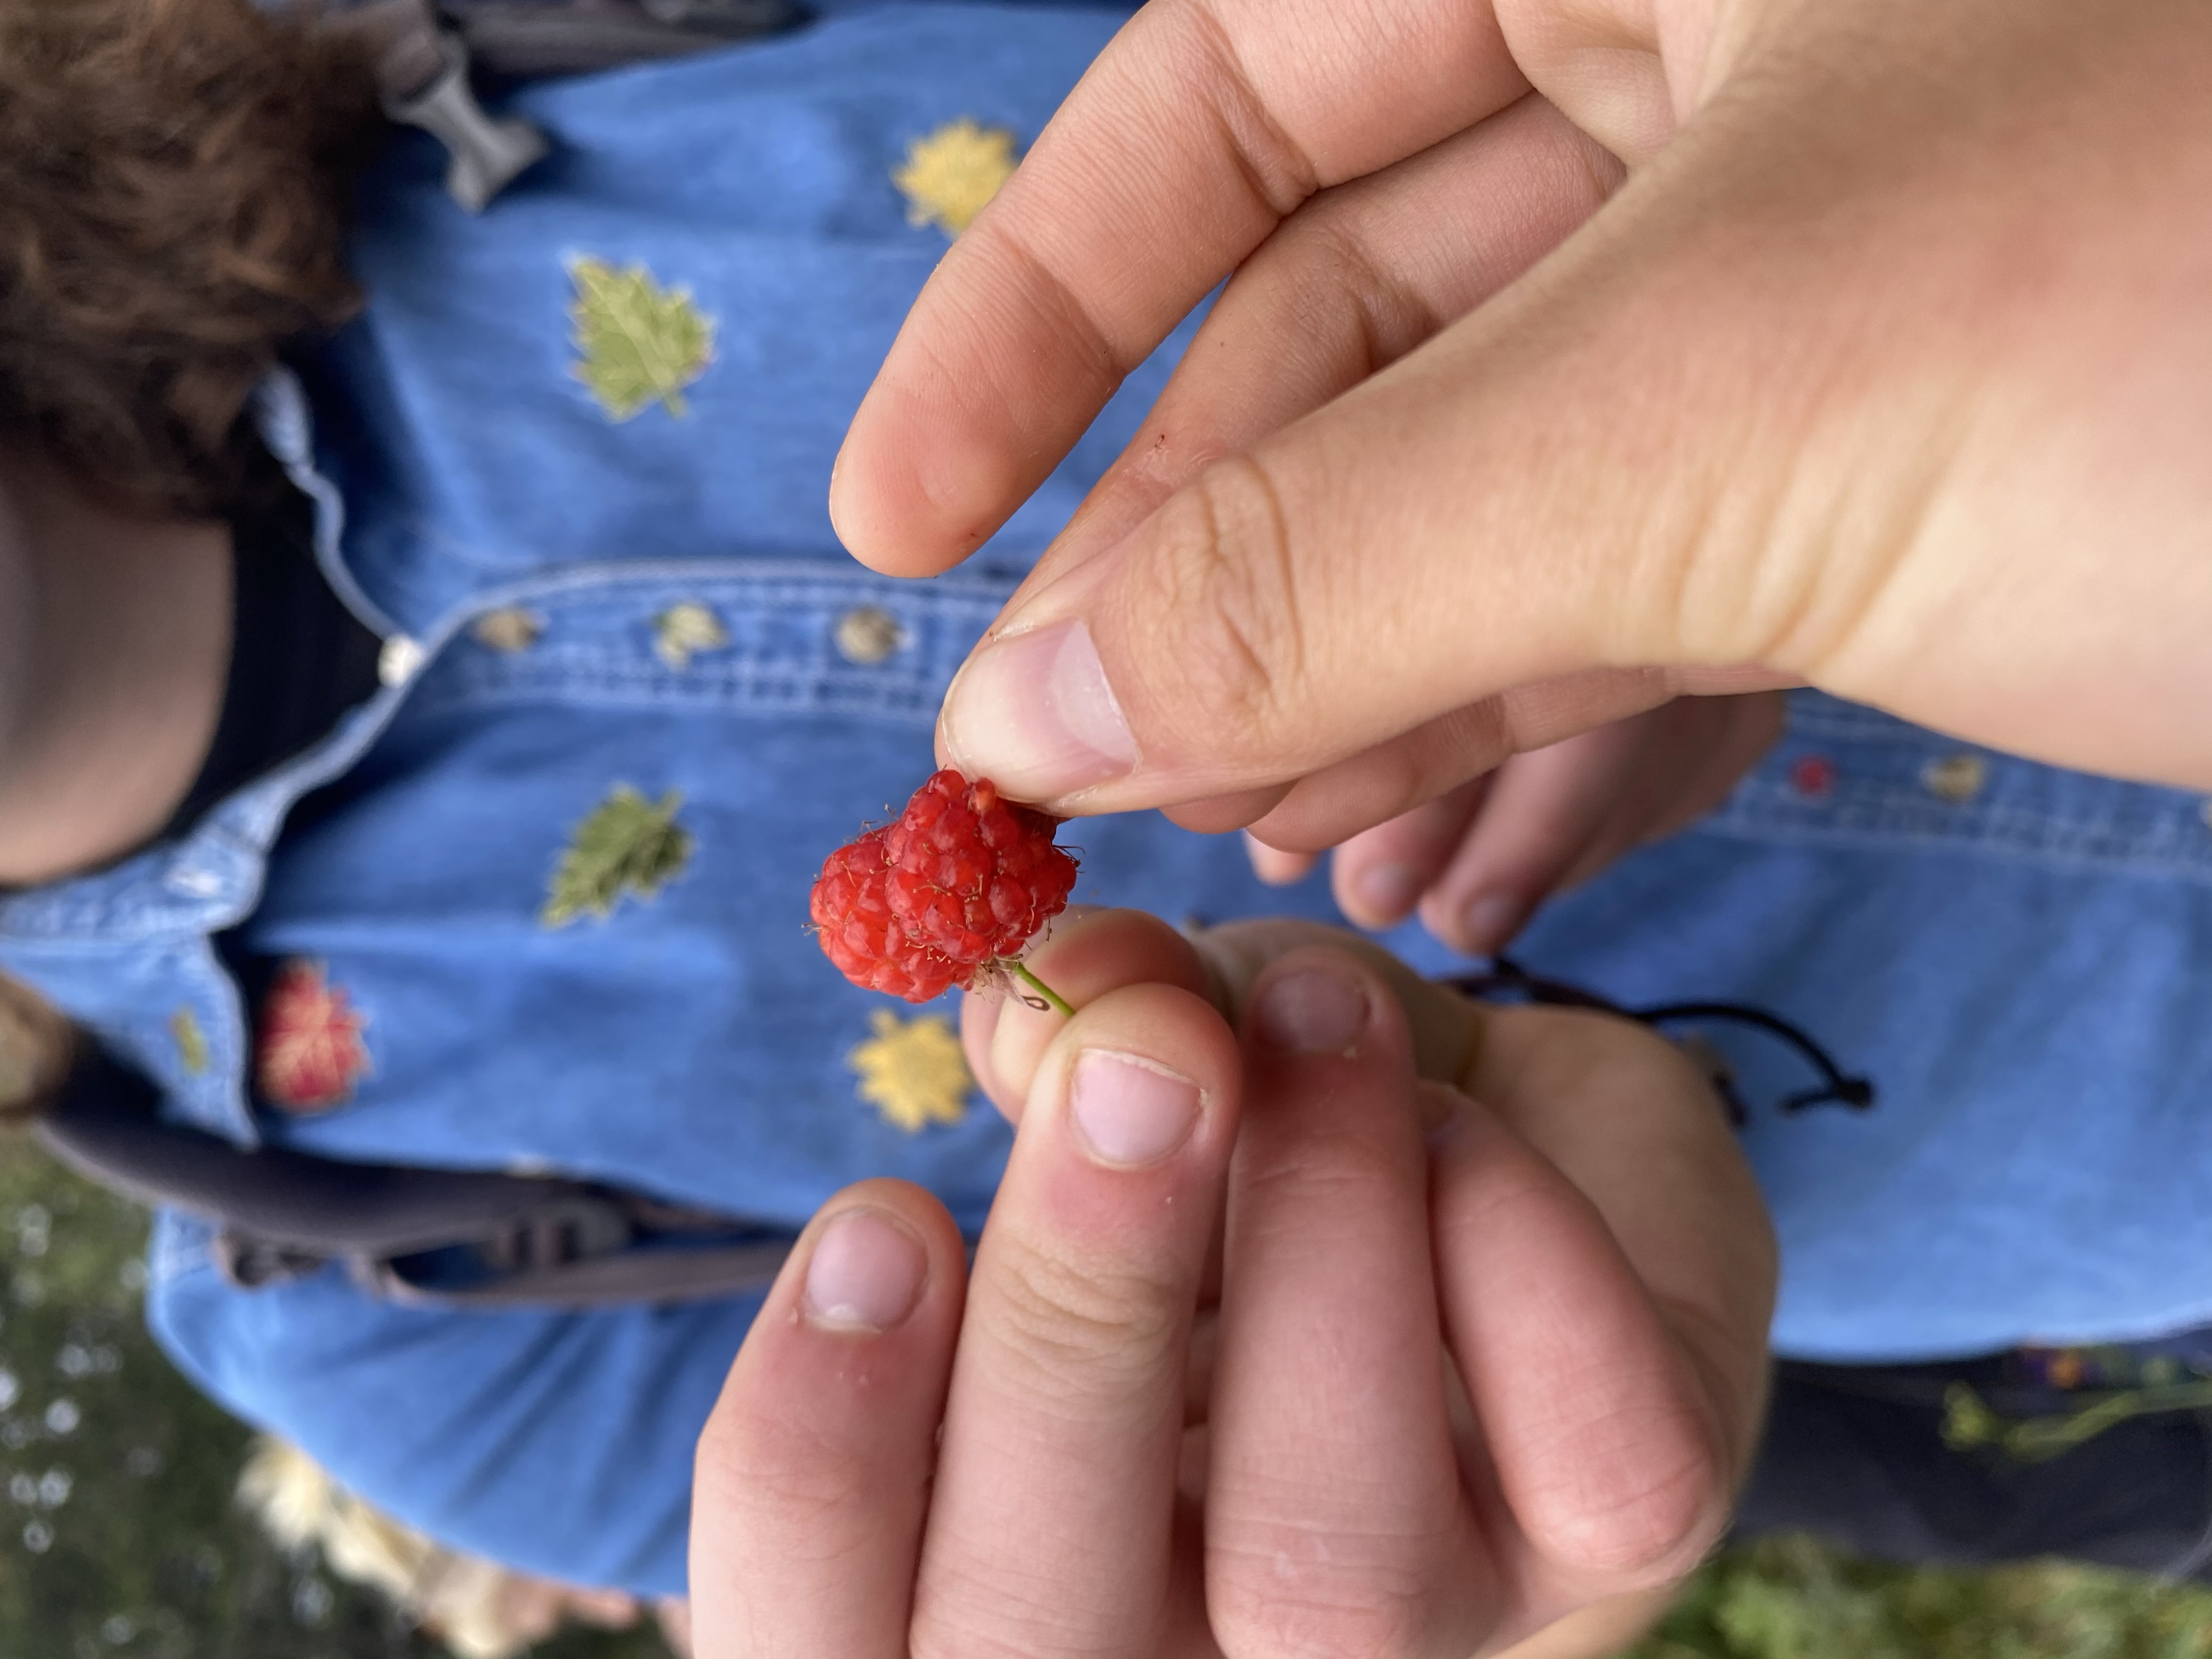 Learning to forage, found a raspberry!